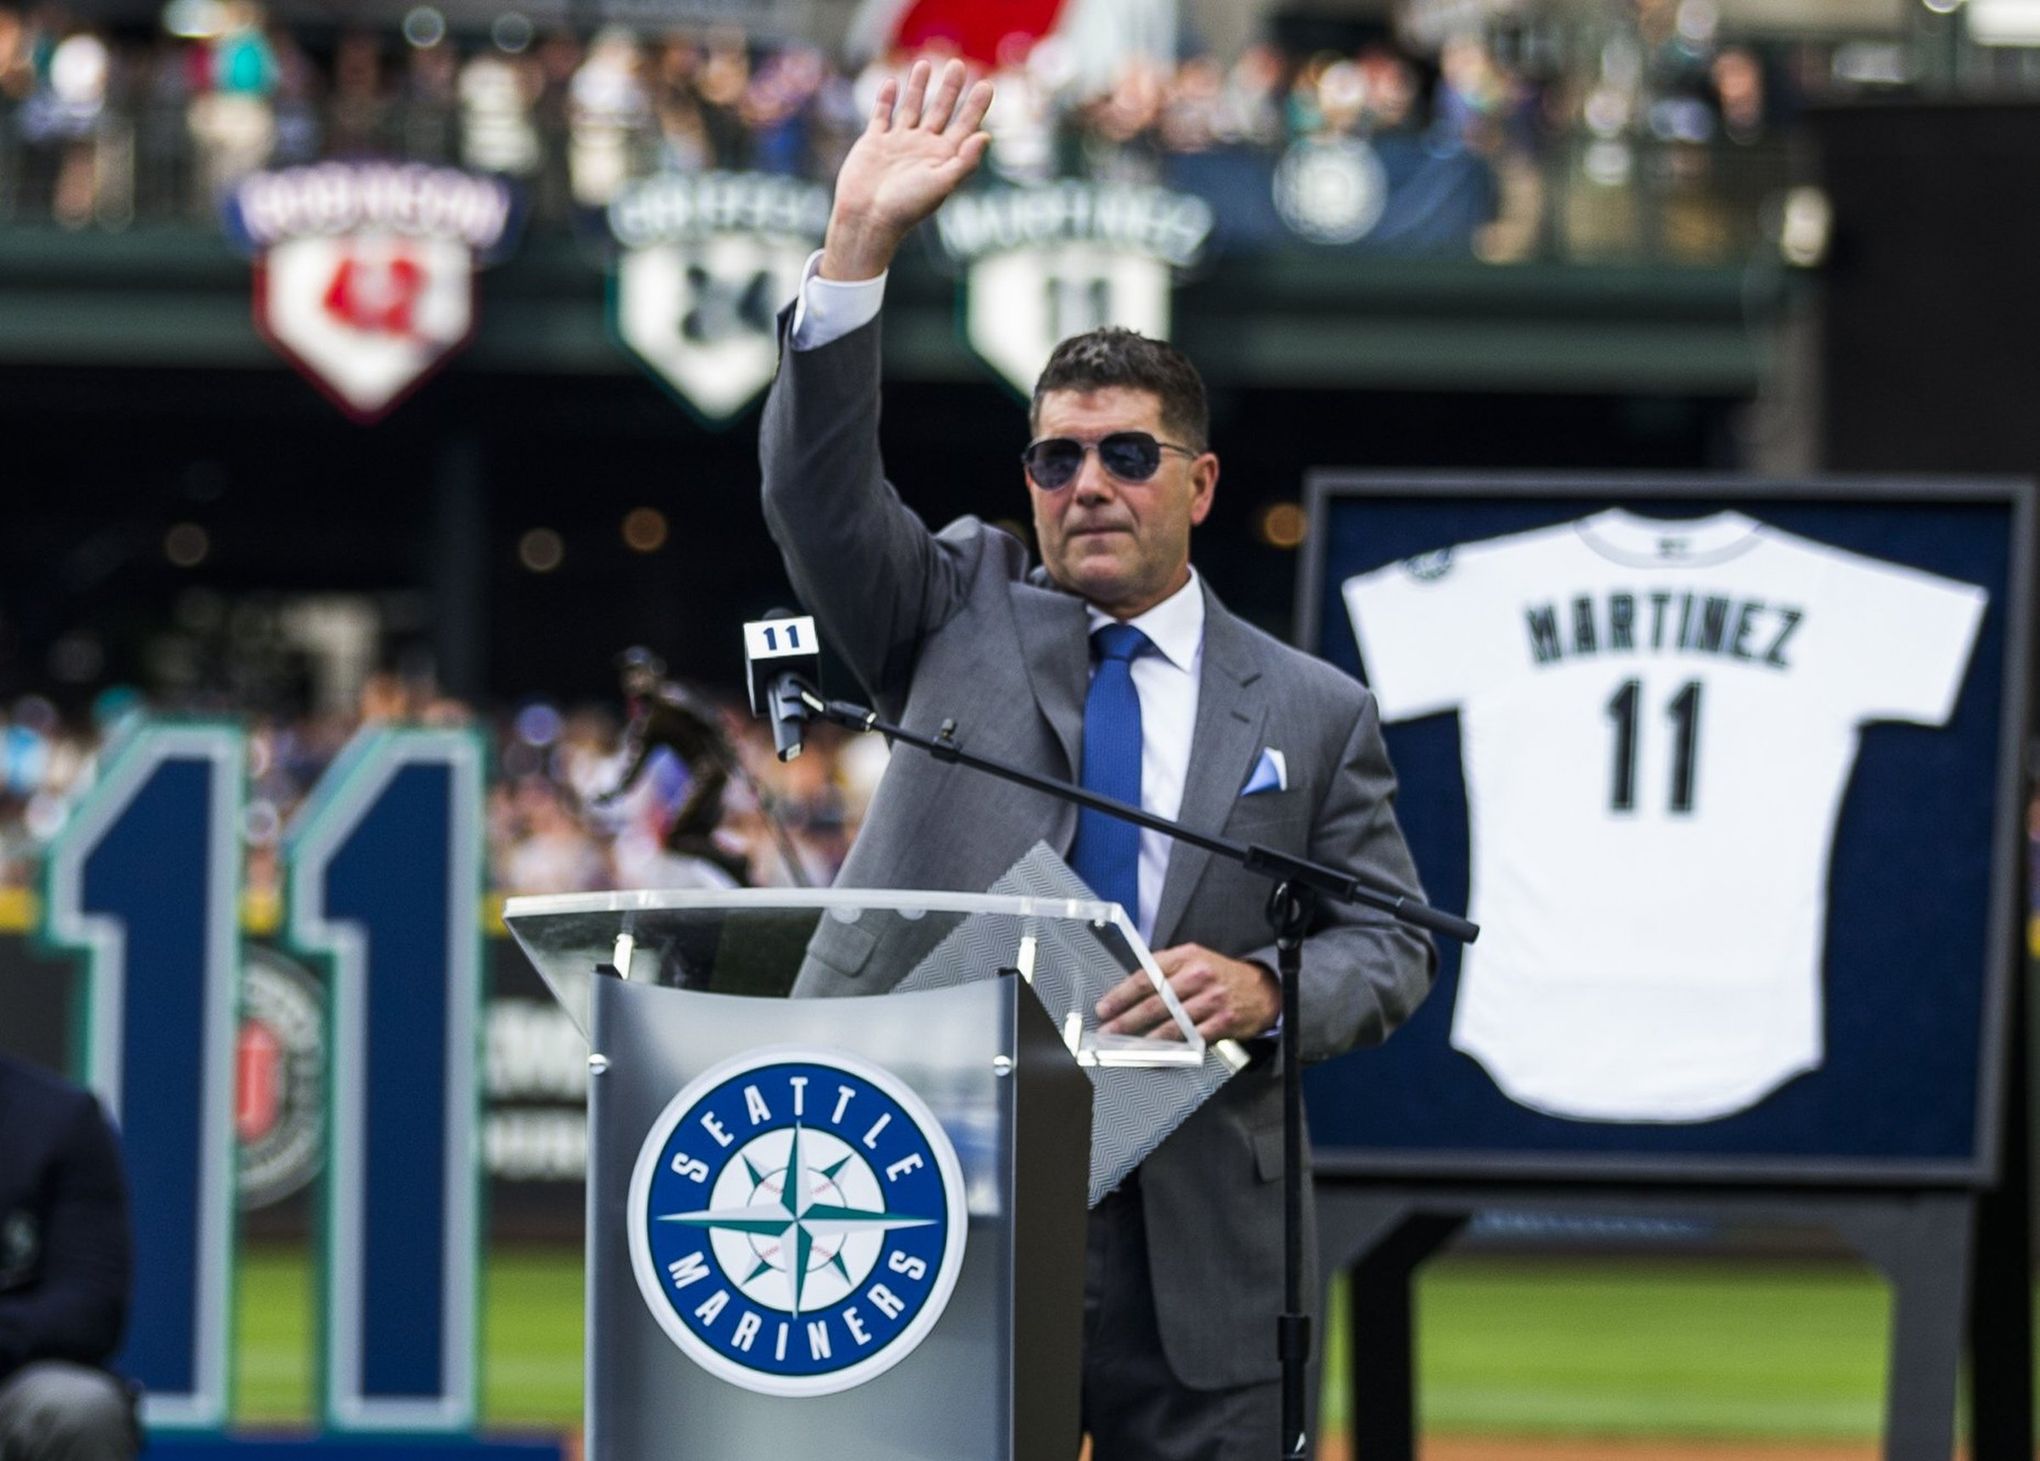 Drayer: With new role, Edgar Martinez will get family time back and still  be part of Mariners - Seattle Sports